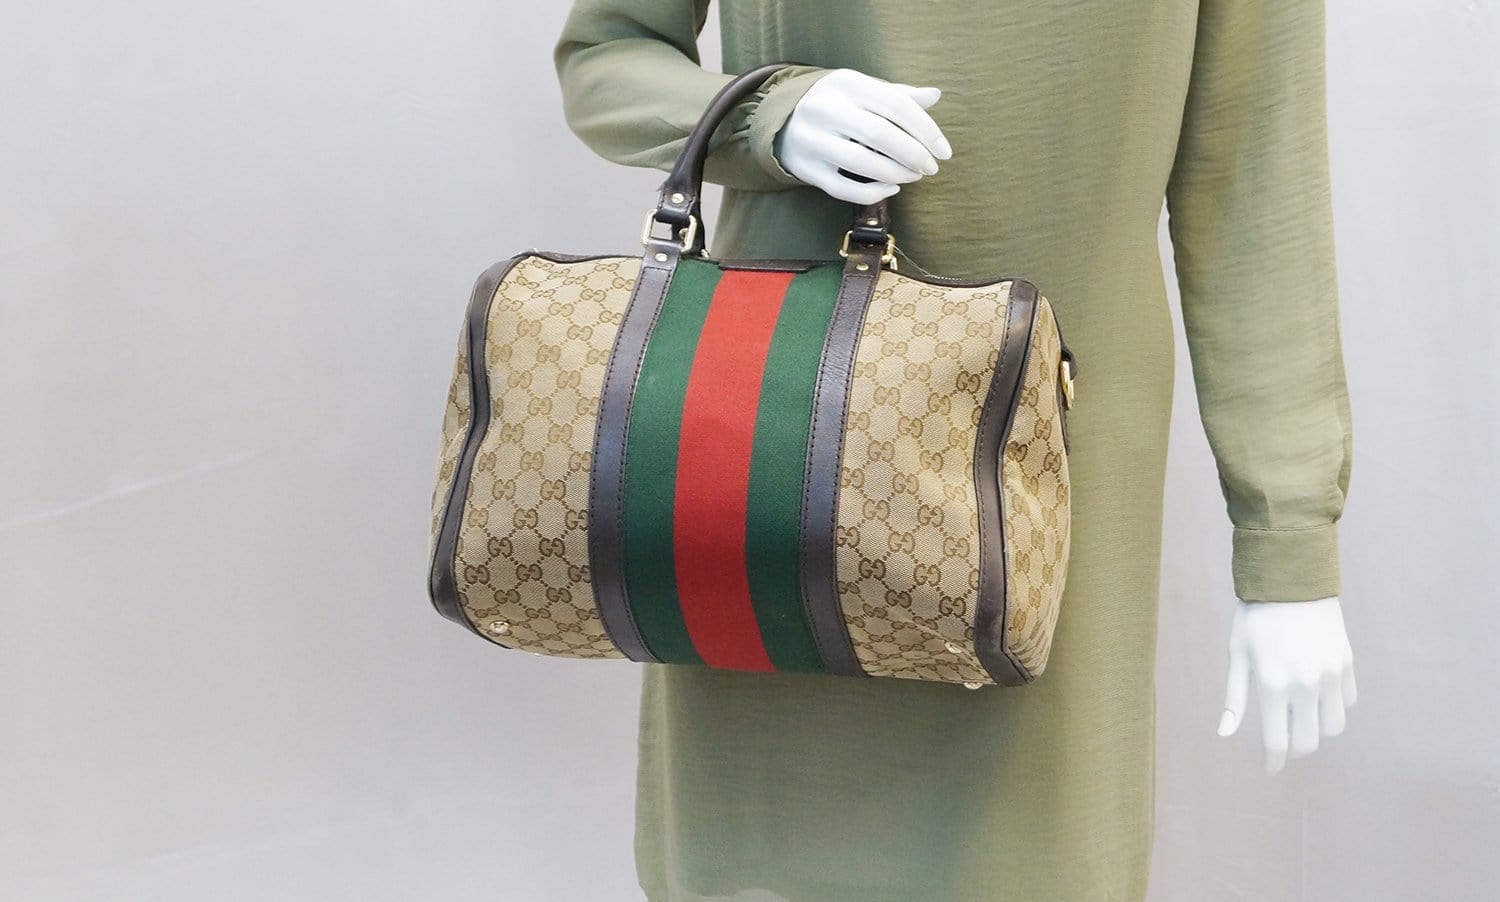 Gucci, Bags, Authentic Gucci Vintage Like Alma Style